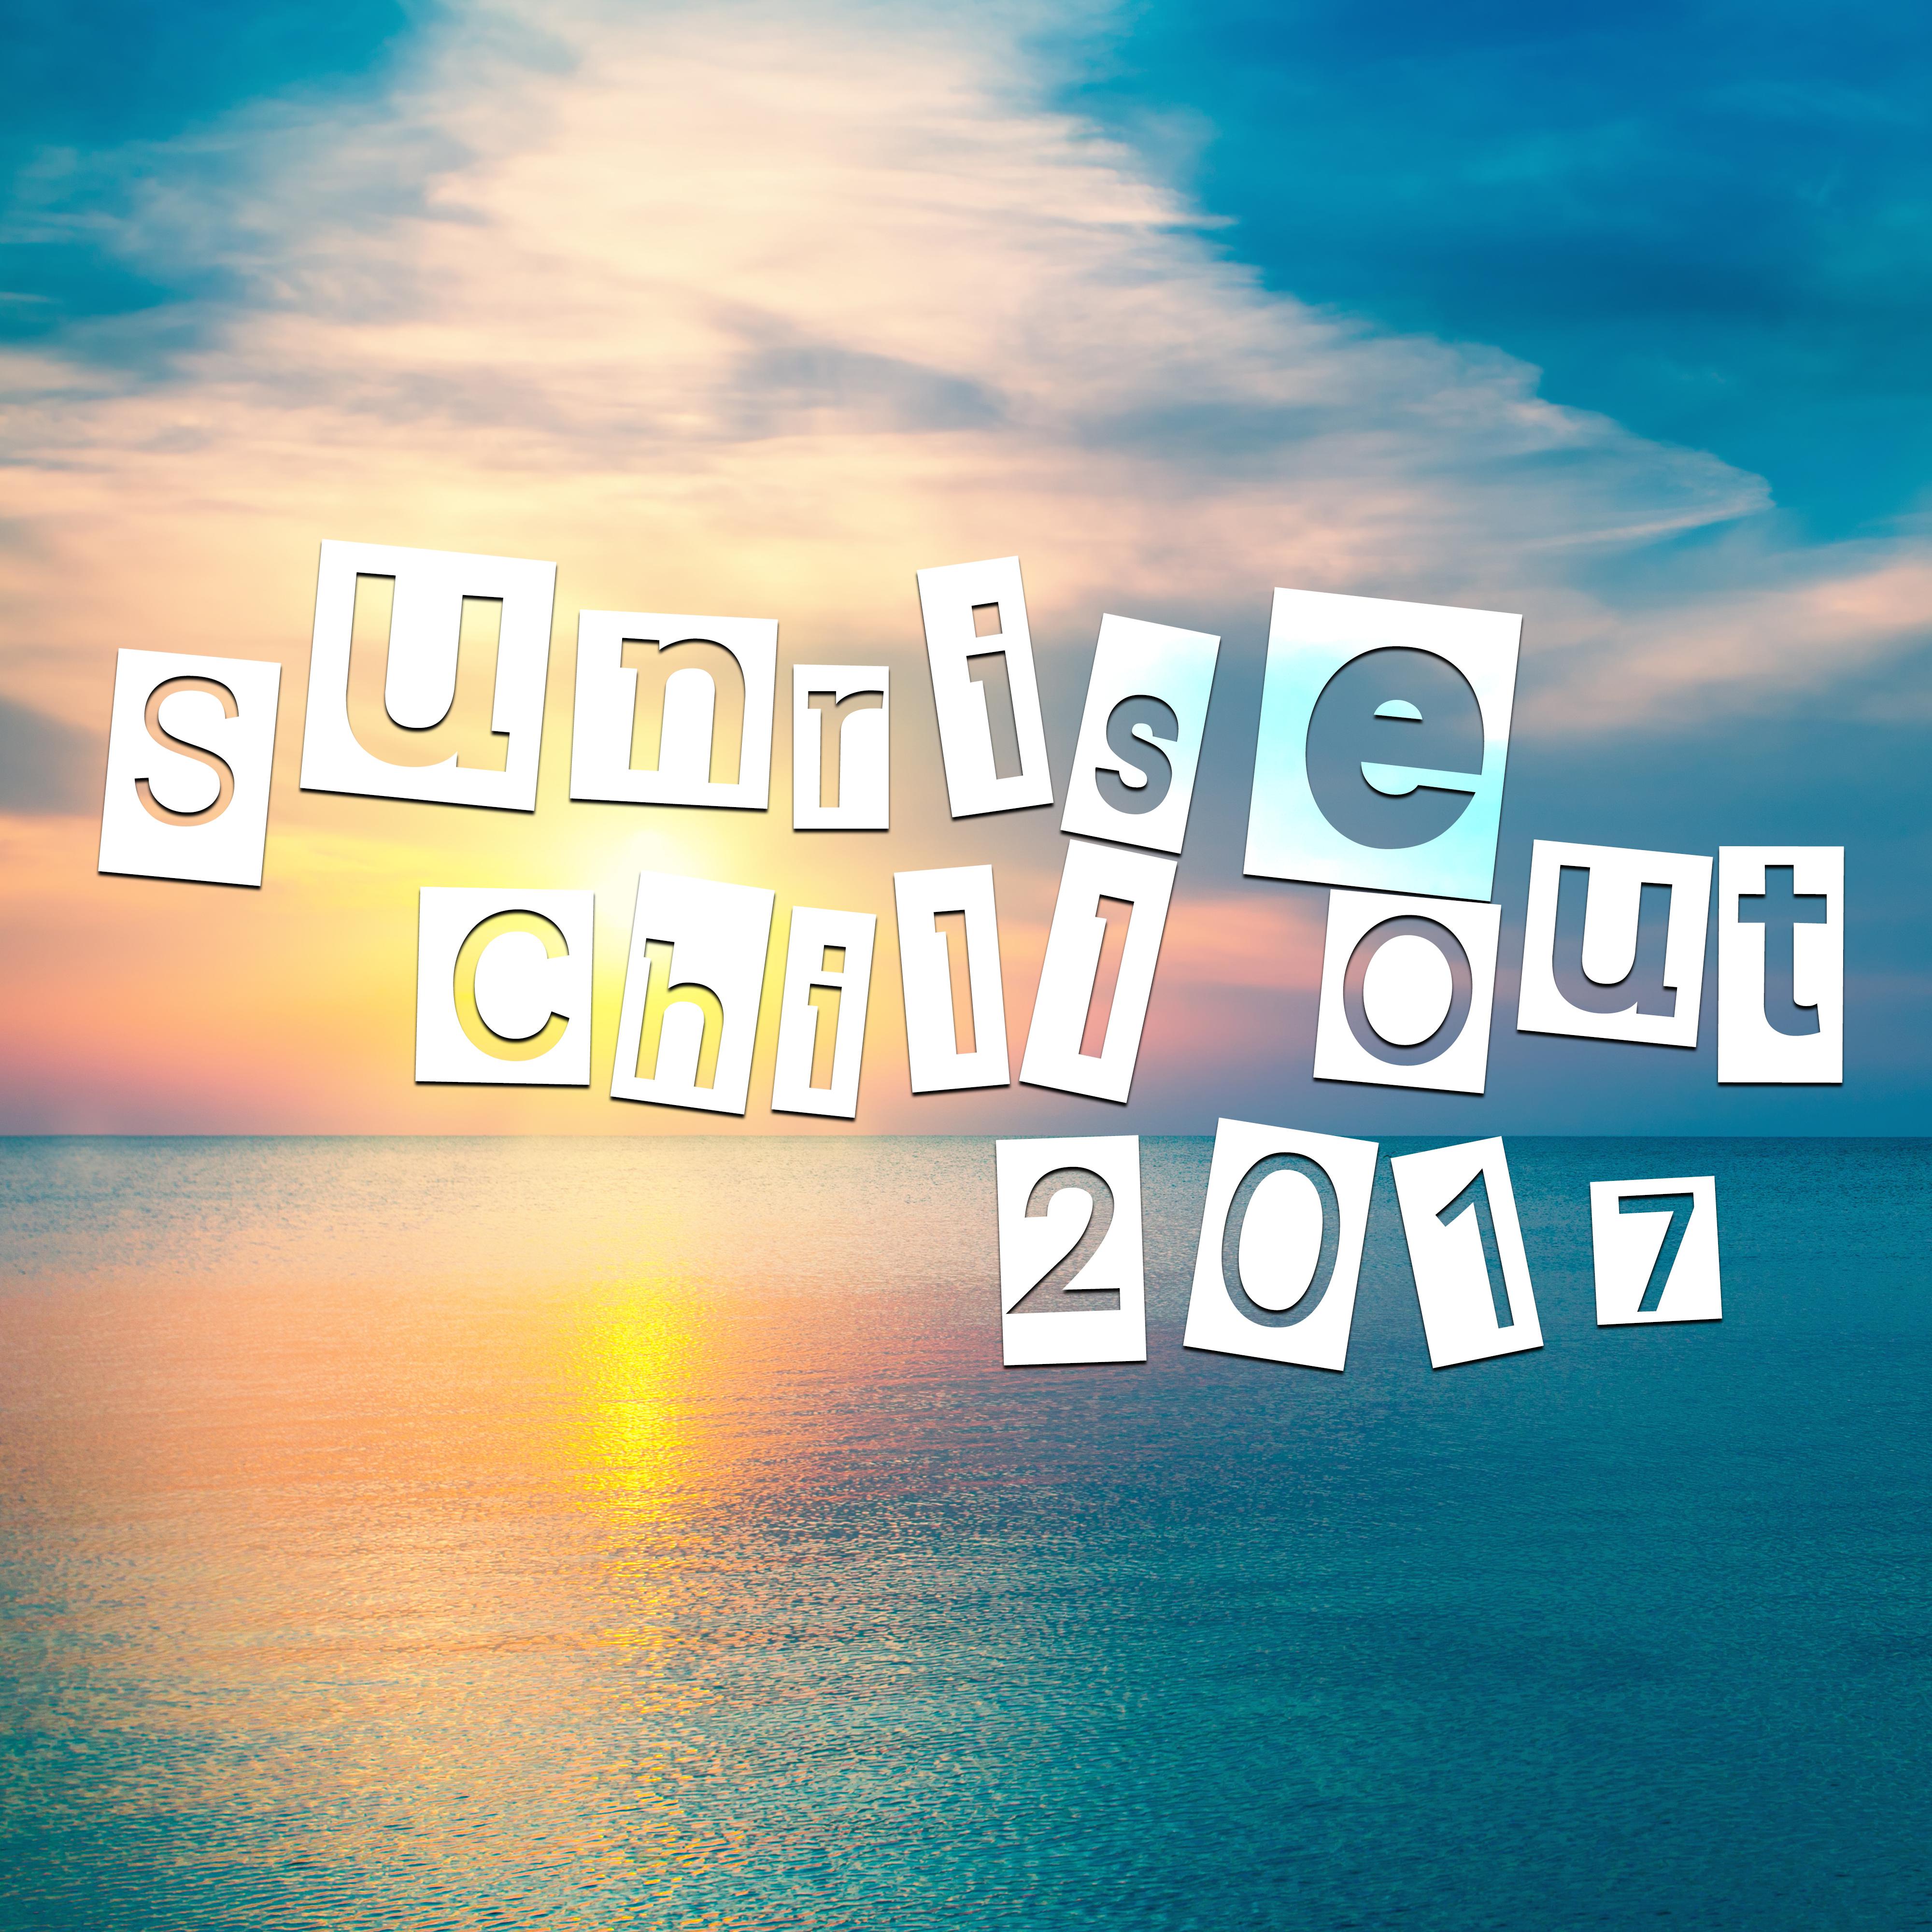 Sunrise Chill Out 2017 – Calming Beach Sounds, Relaxing Melodies, Miami Summertime, Chilled Music